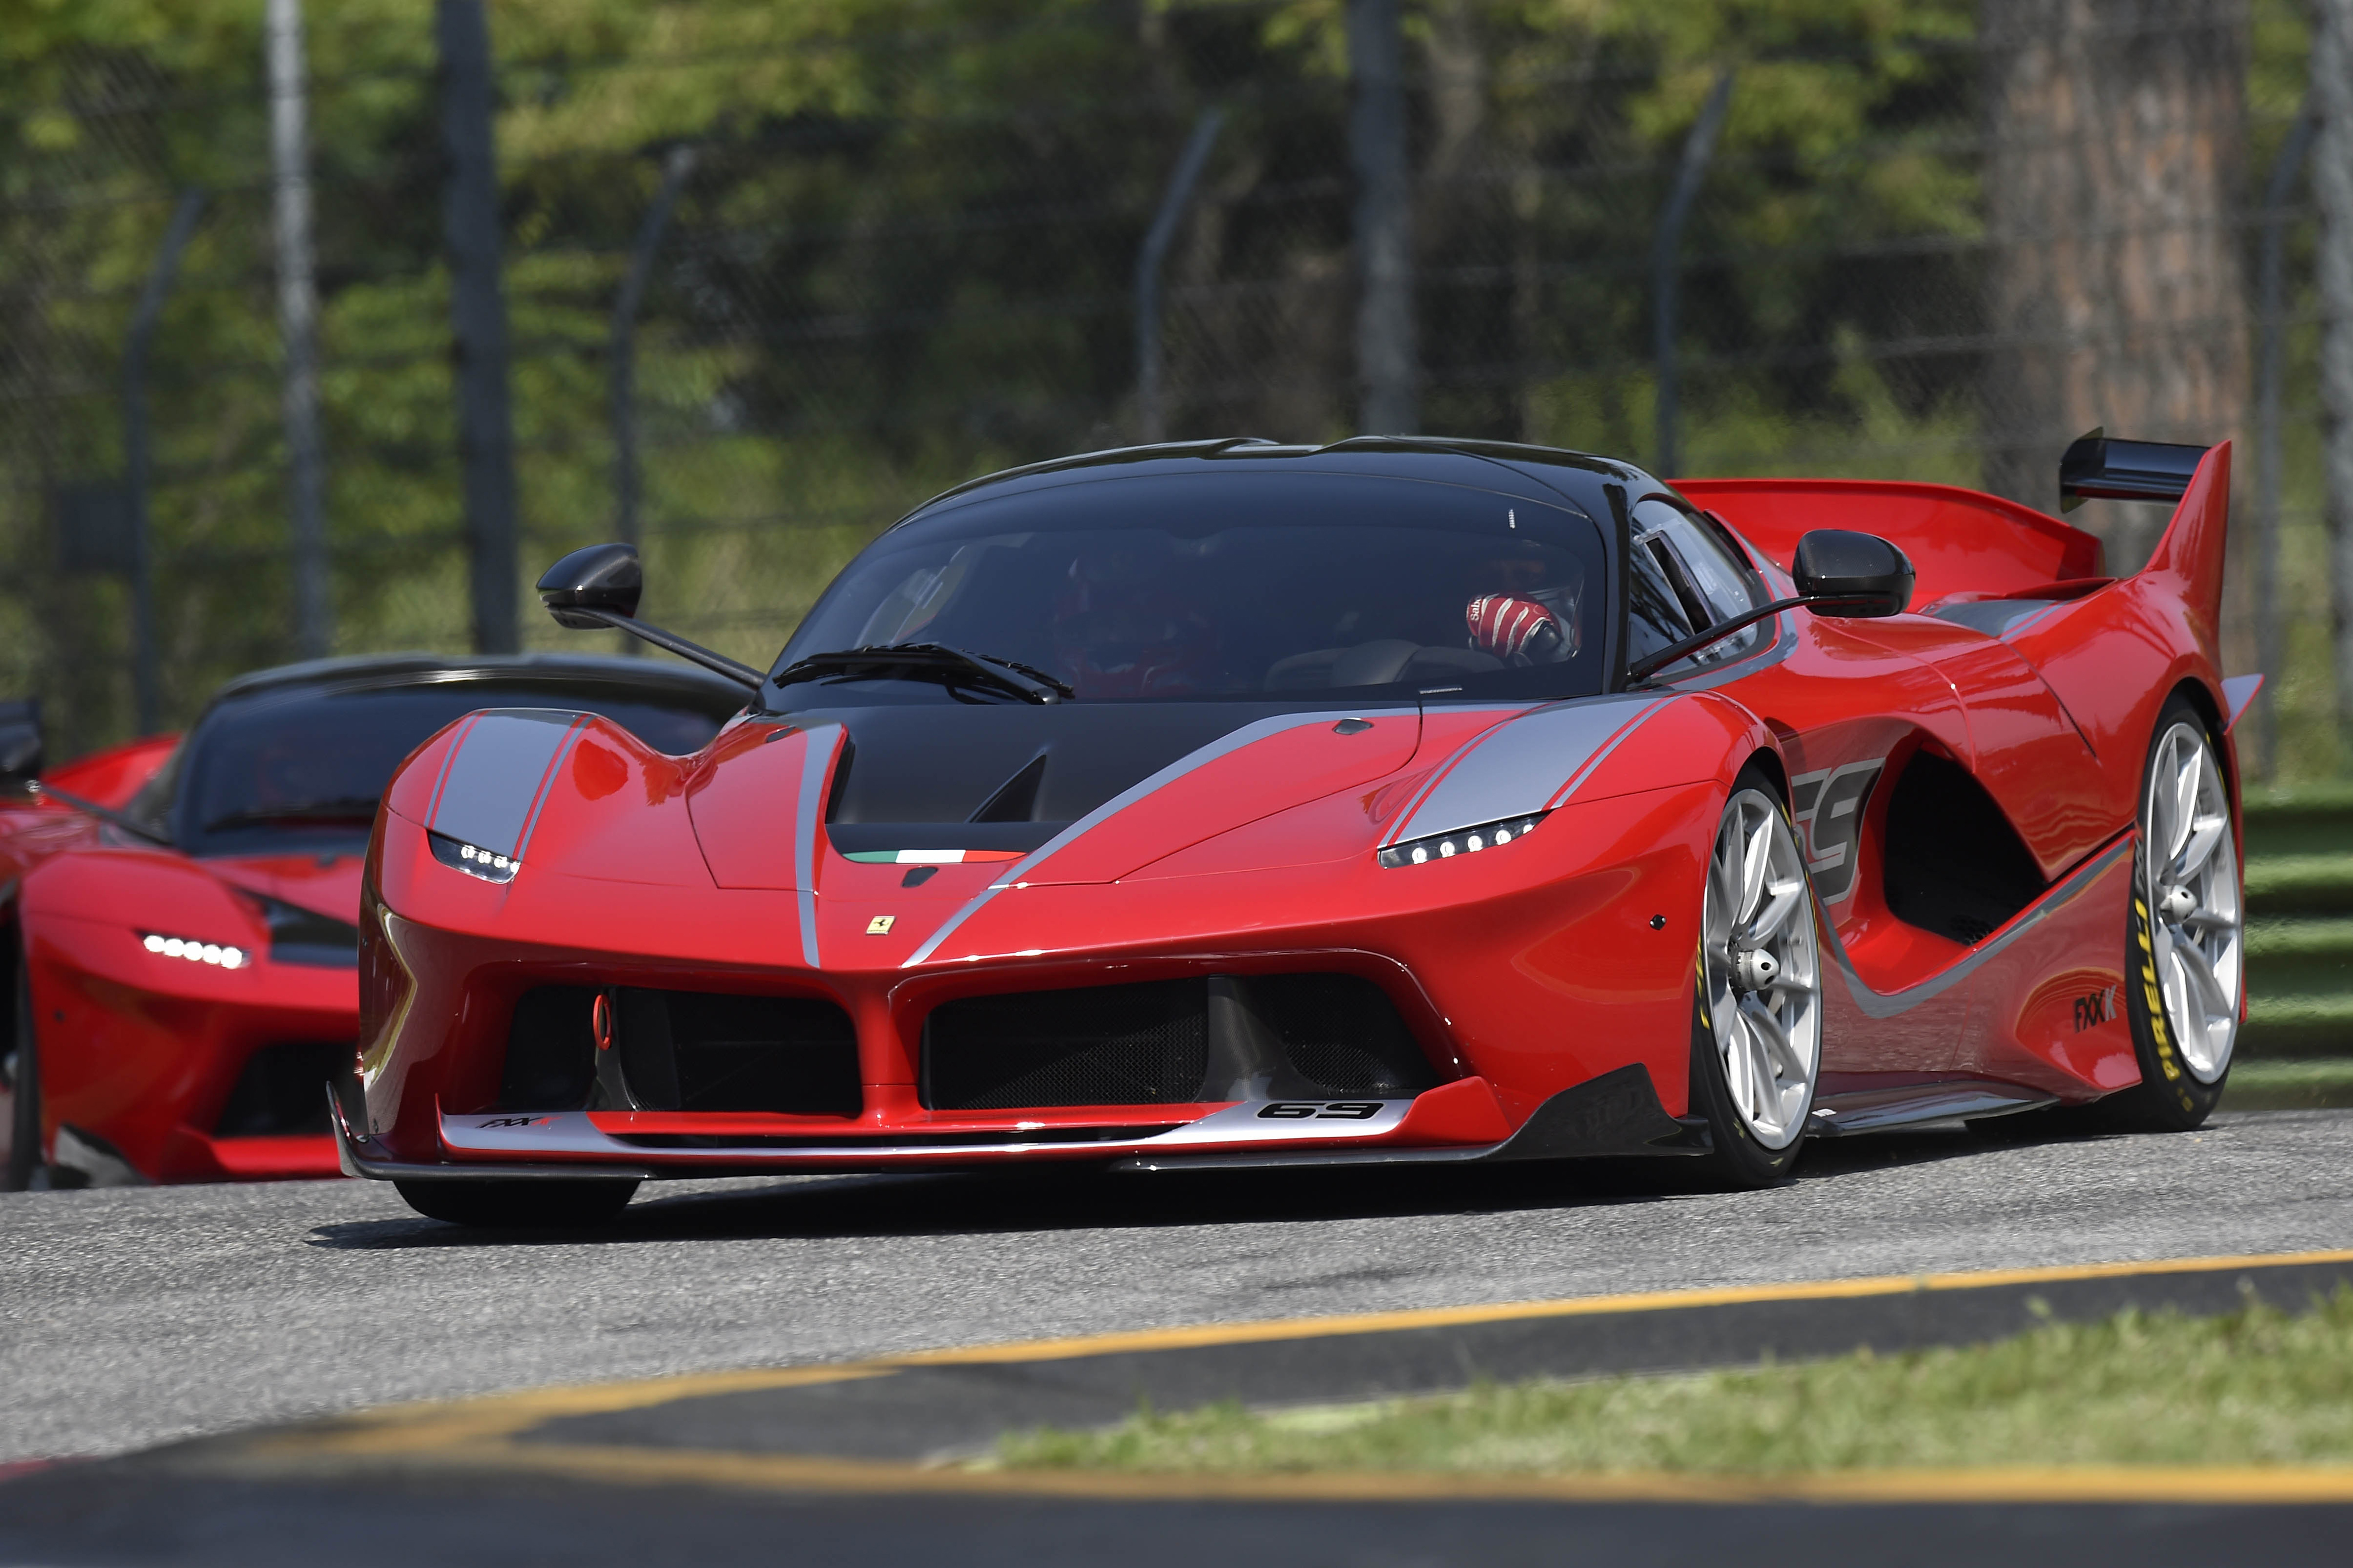 Ferrari Fxx K Wallpapers Images Photos Pictures Backgrounds